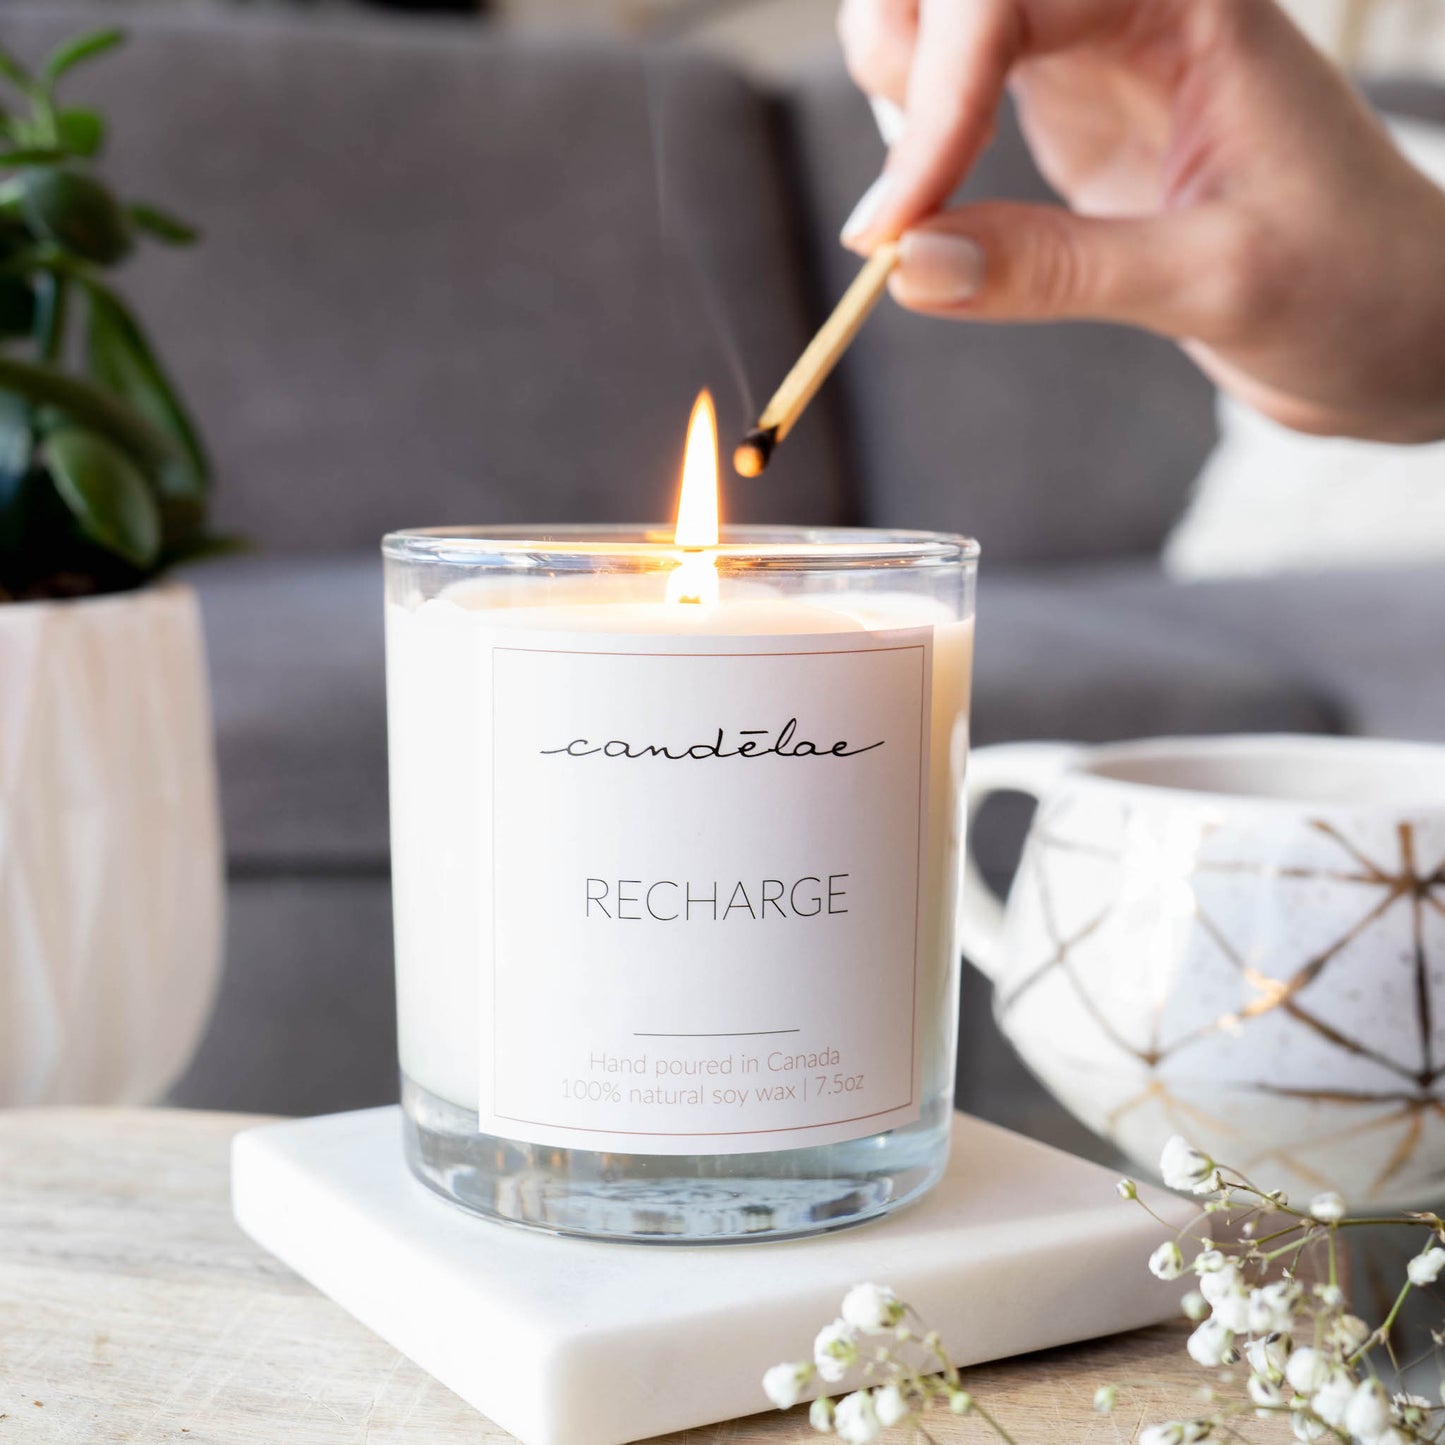 Someone is lighting up its scented candle by candēlae to recharge after a long day of work 